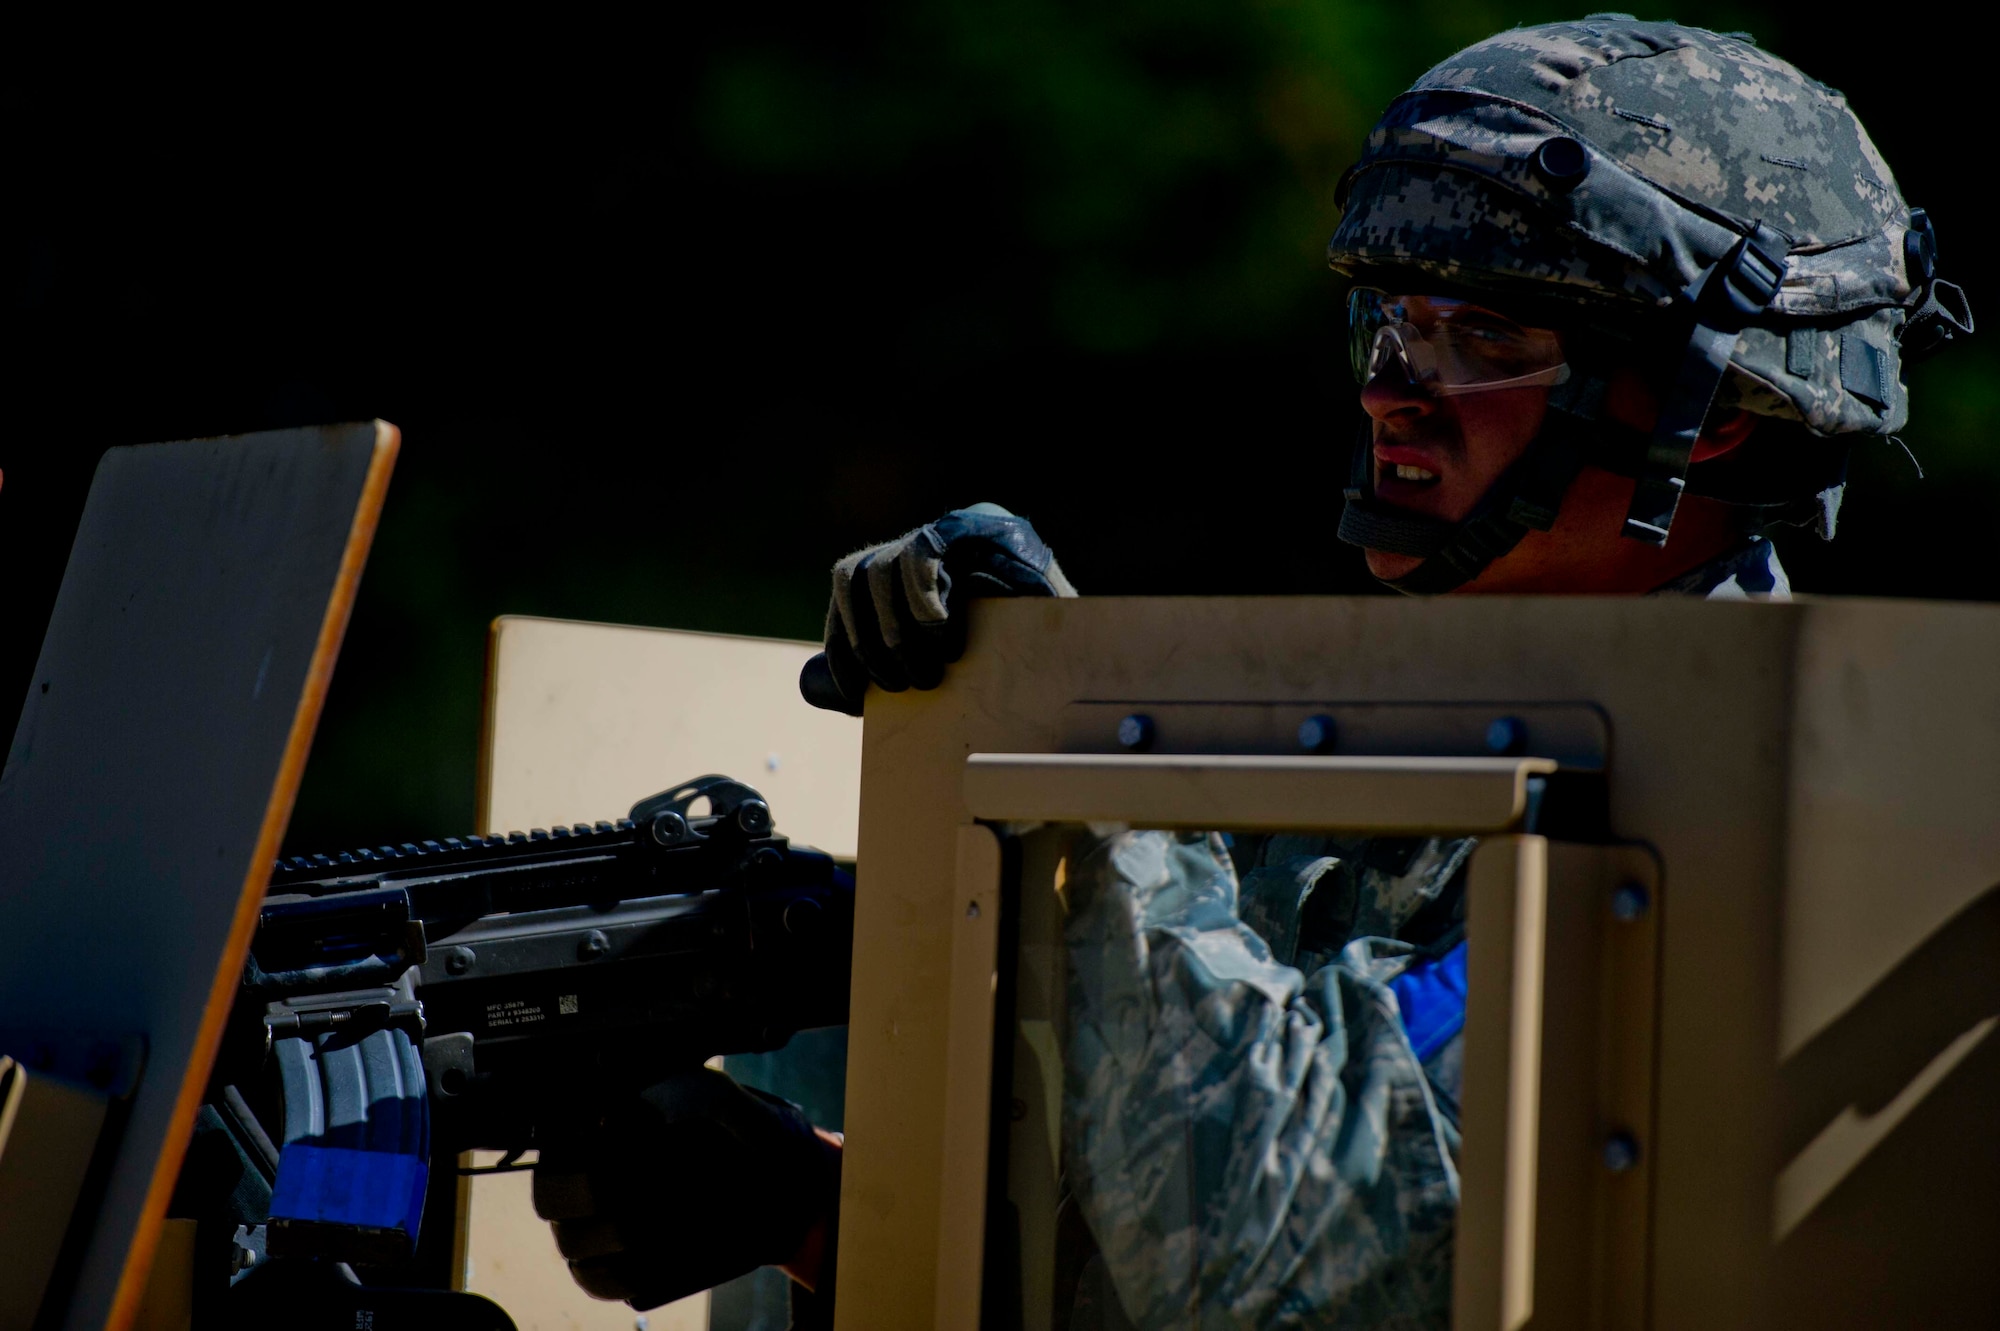 A Citizen Airman from the 446th Security Forces Squadron focuses while riding in an armored vehicle during a large-scale Field Training Exercise at Joint Base Lewis-McChord September 8 - 11th. The exercise challenged SFS members to train in an expeditionary environment and included U.S. Army aviation assets and 446th Airlift Wing medical personnel. (U.S. Air Force Reserve photo by Staff Sgt. Daniel Liddicoet)